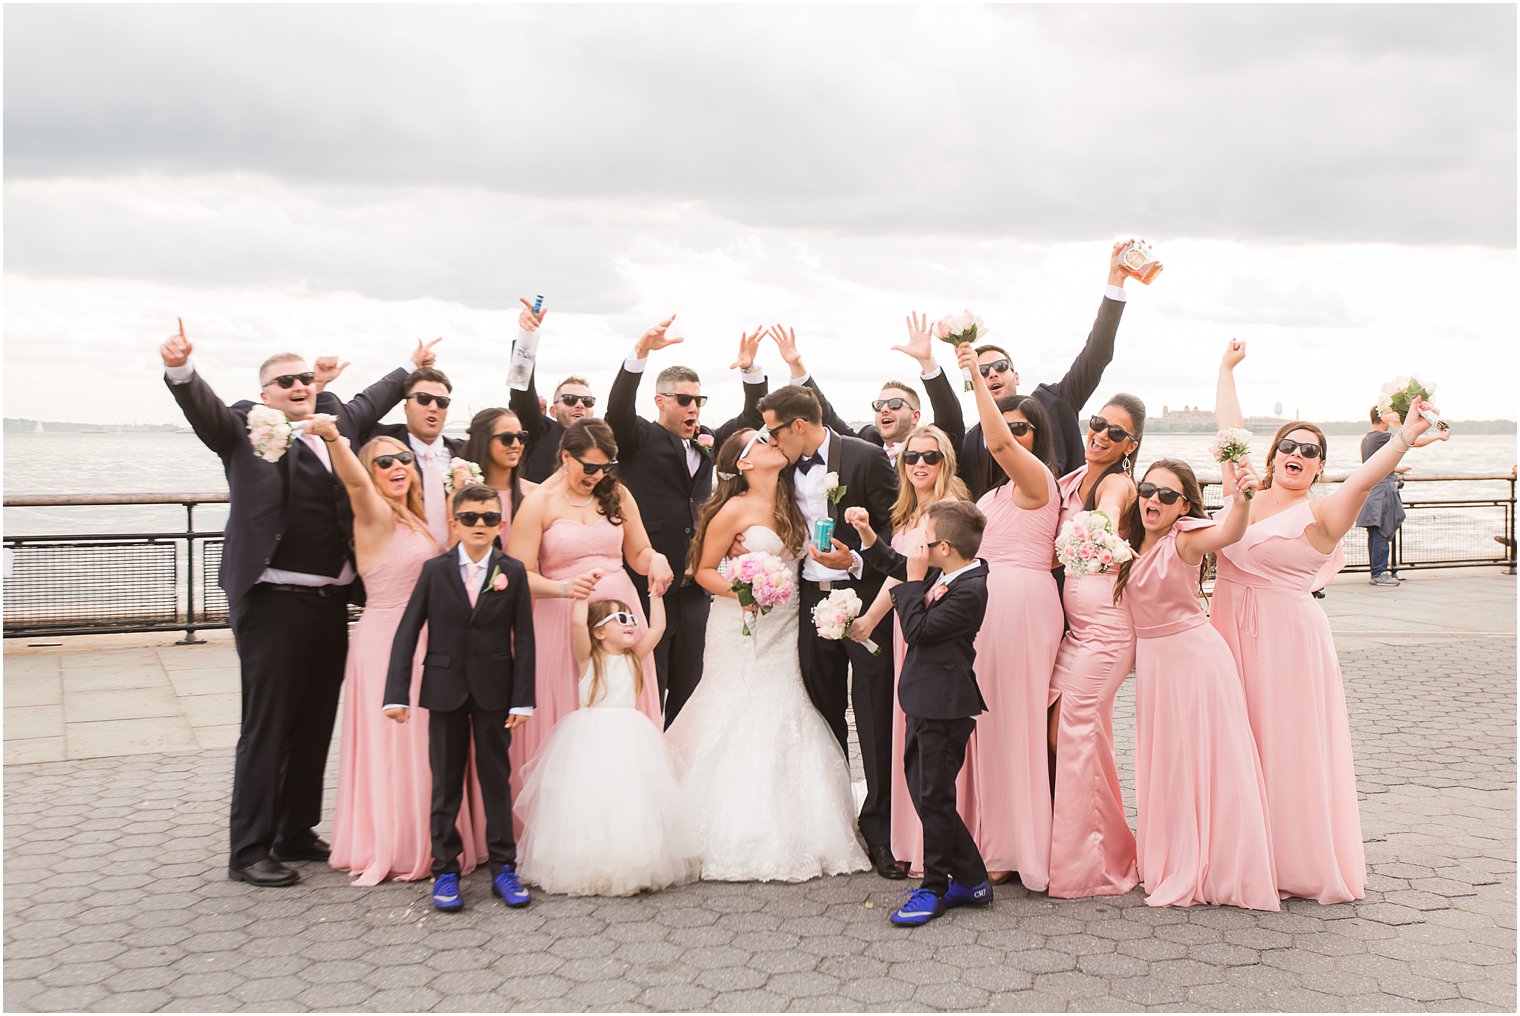 Bridal party wearing sunglasses